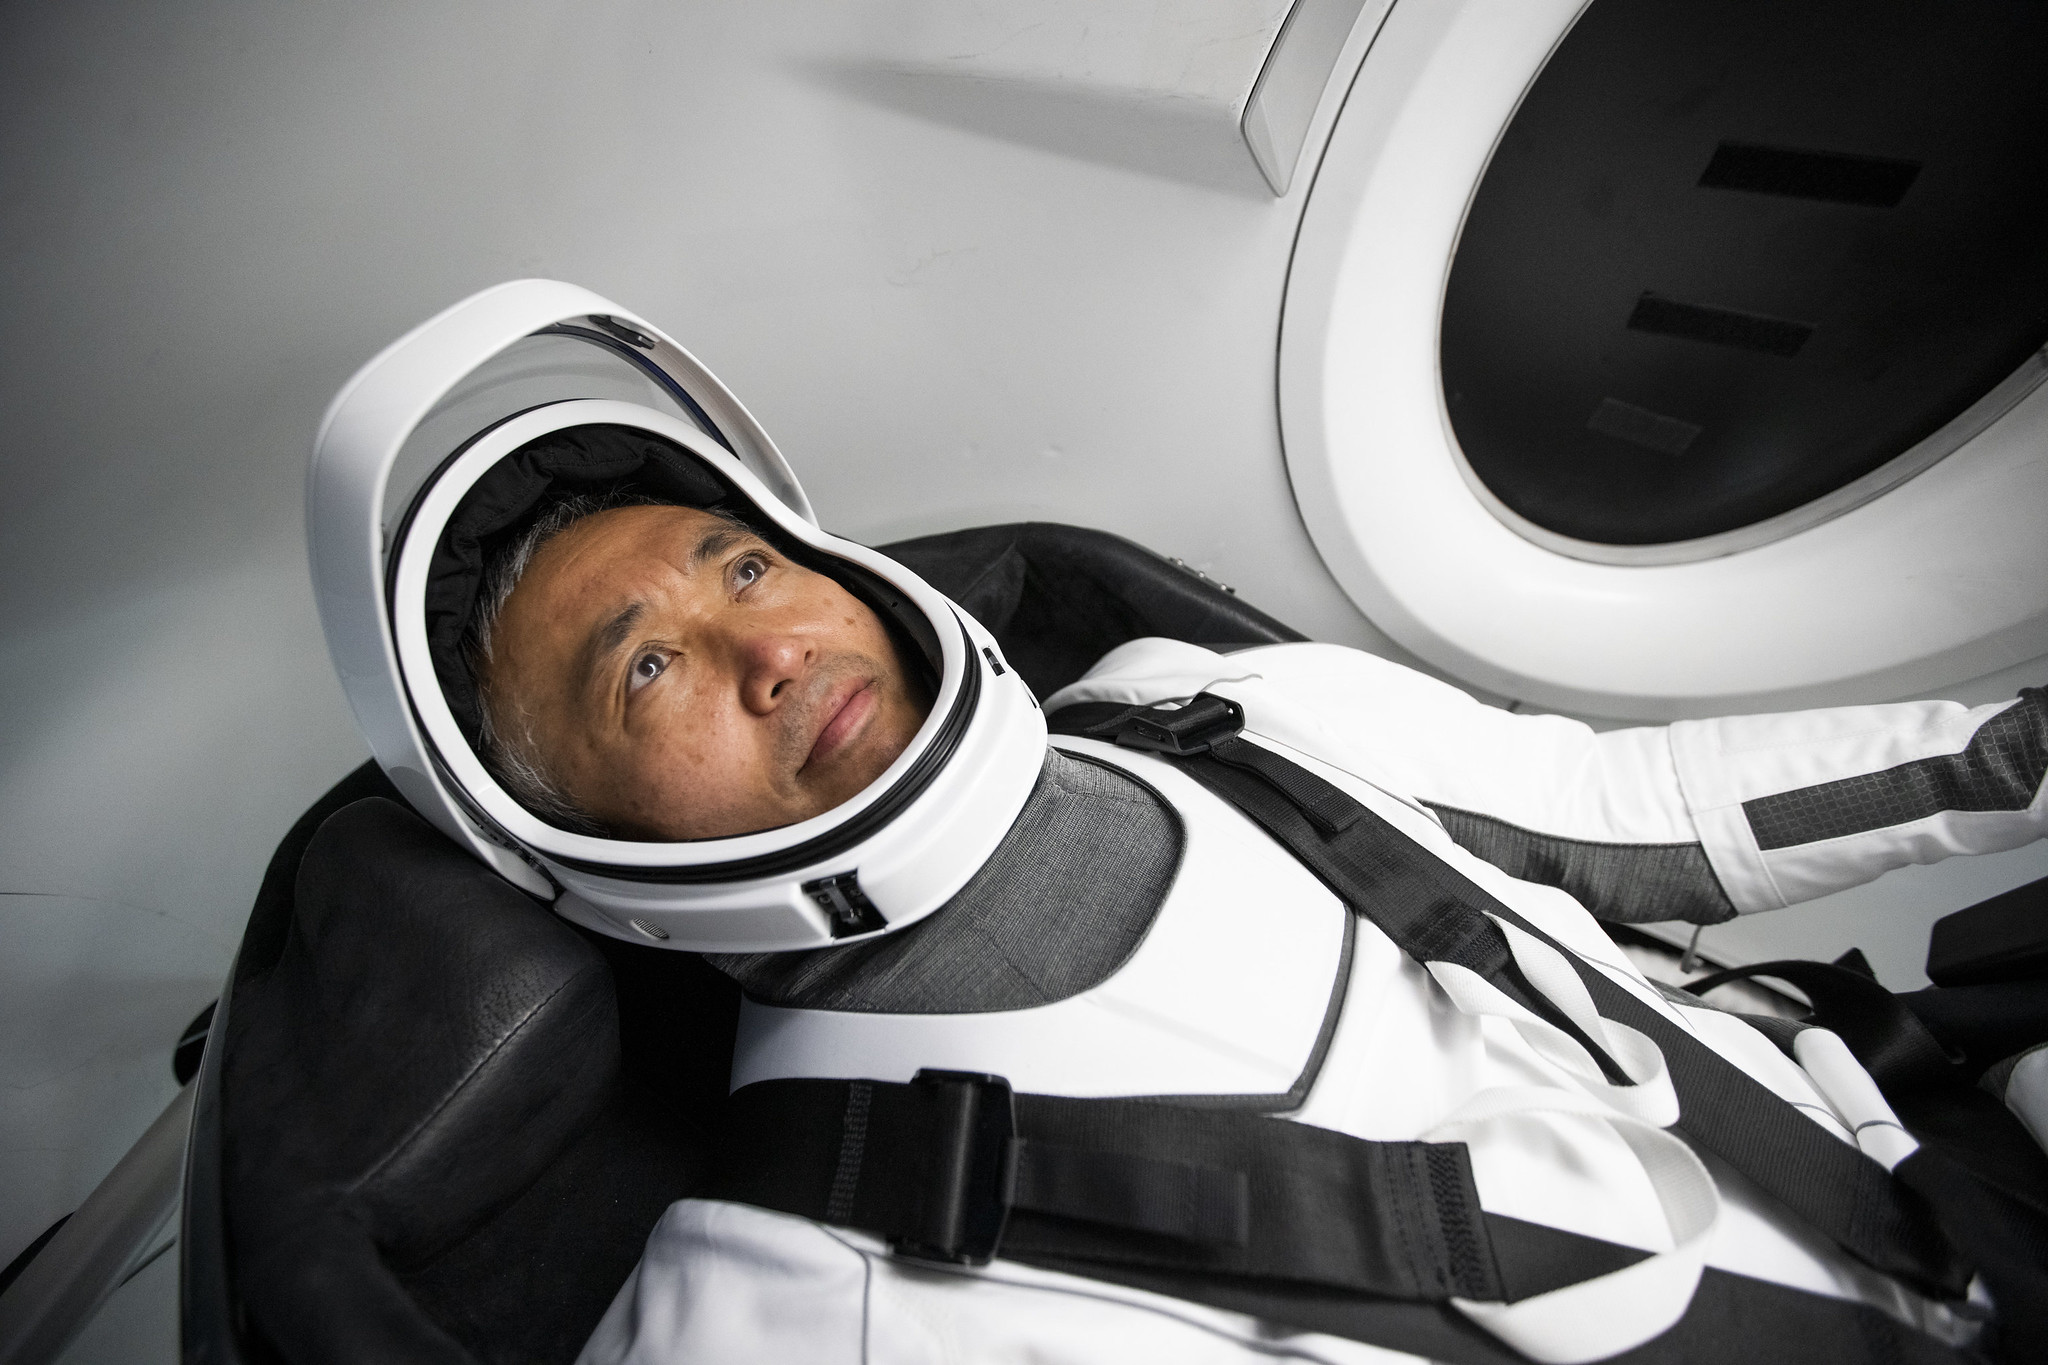 SpaceX Crew-5 Mission Specialist Koichi Wakata from the Japan Aerospace Exploration Agency (JAXA) is pictured during a Crew Dragon cockpit training session at SpaceX headquarters in Hawthorne, California.